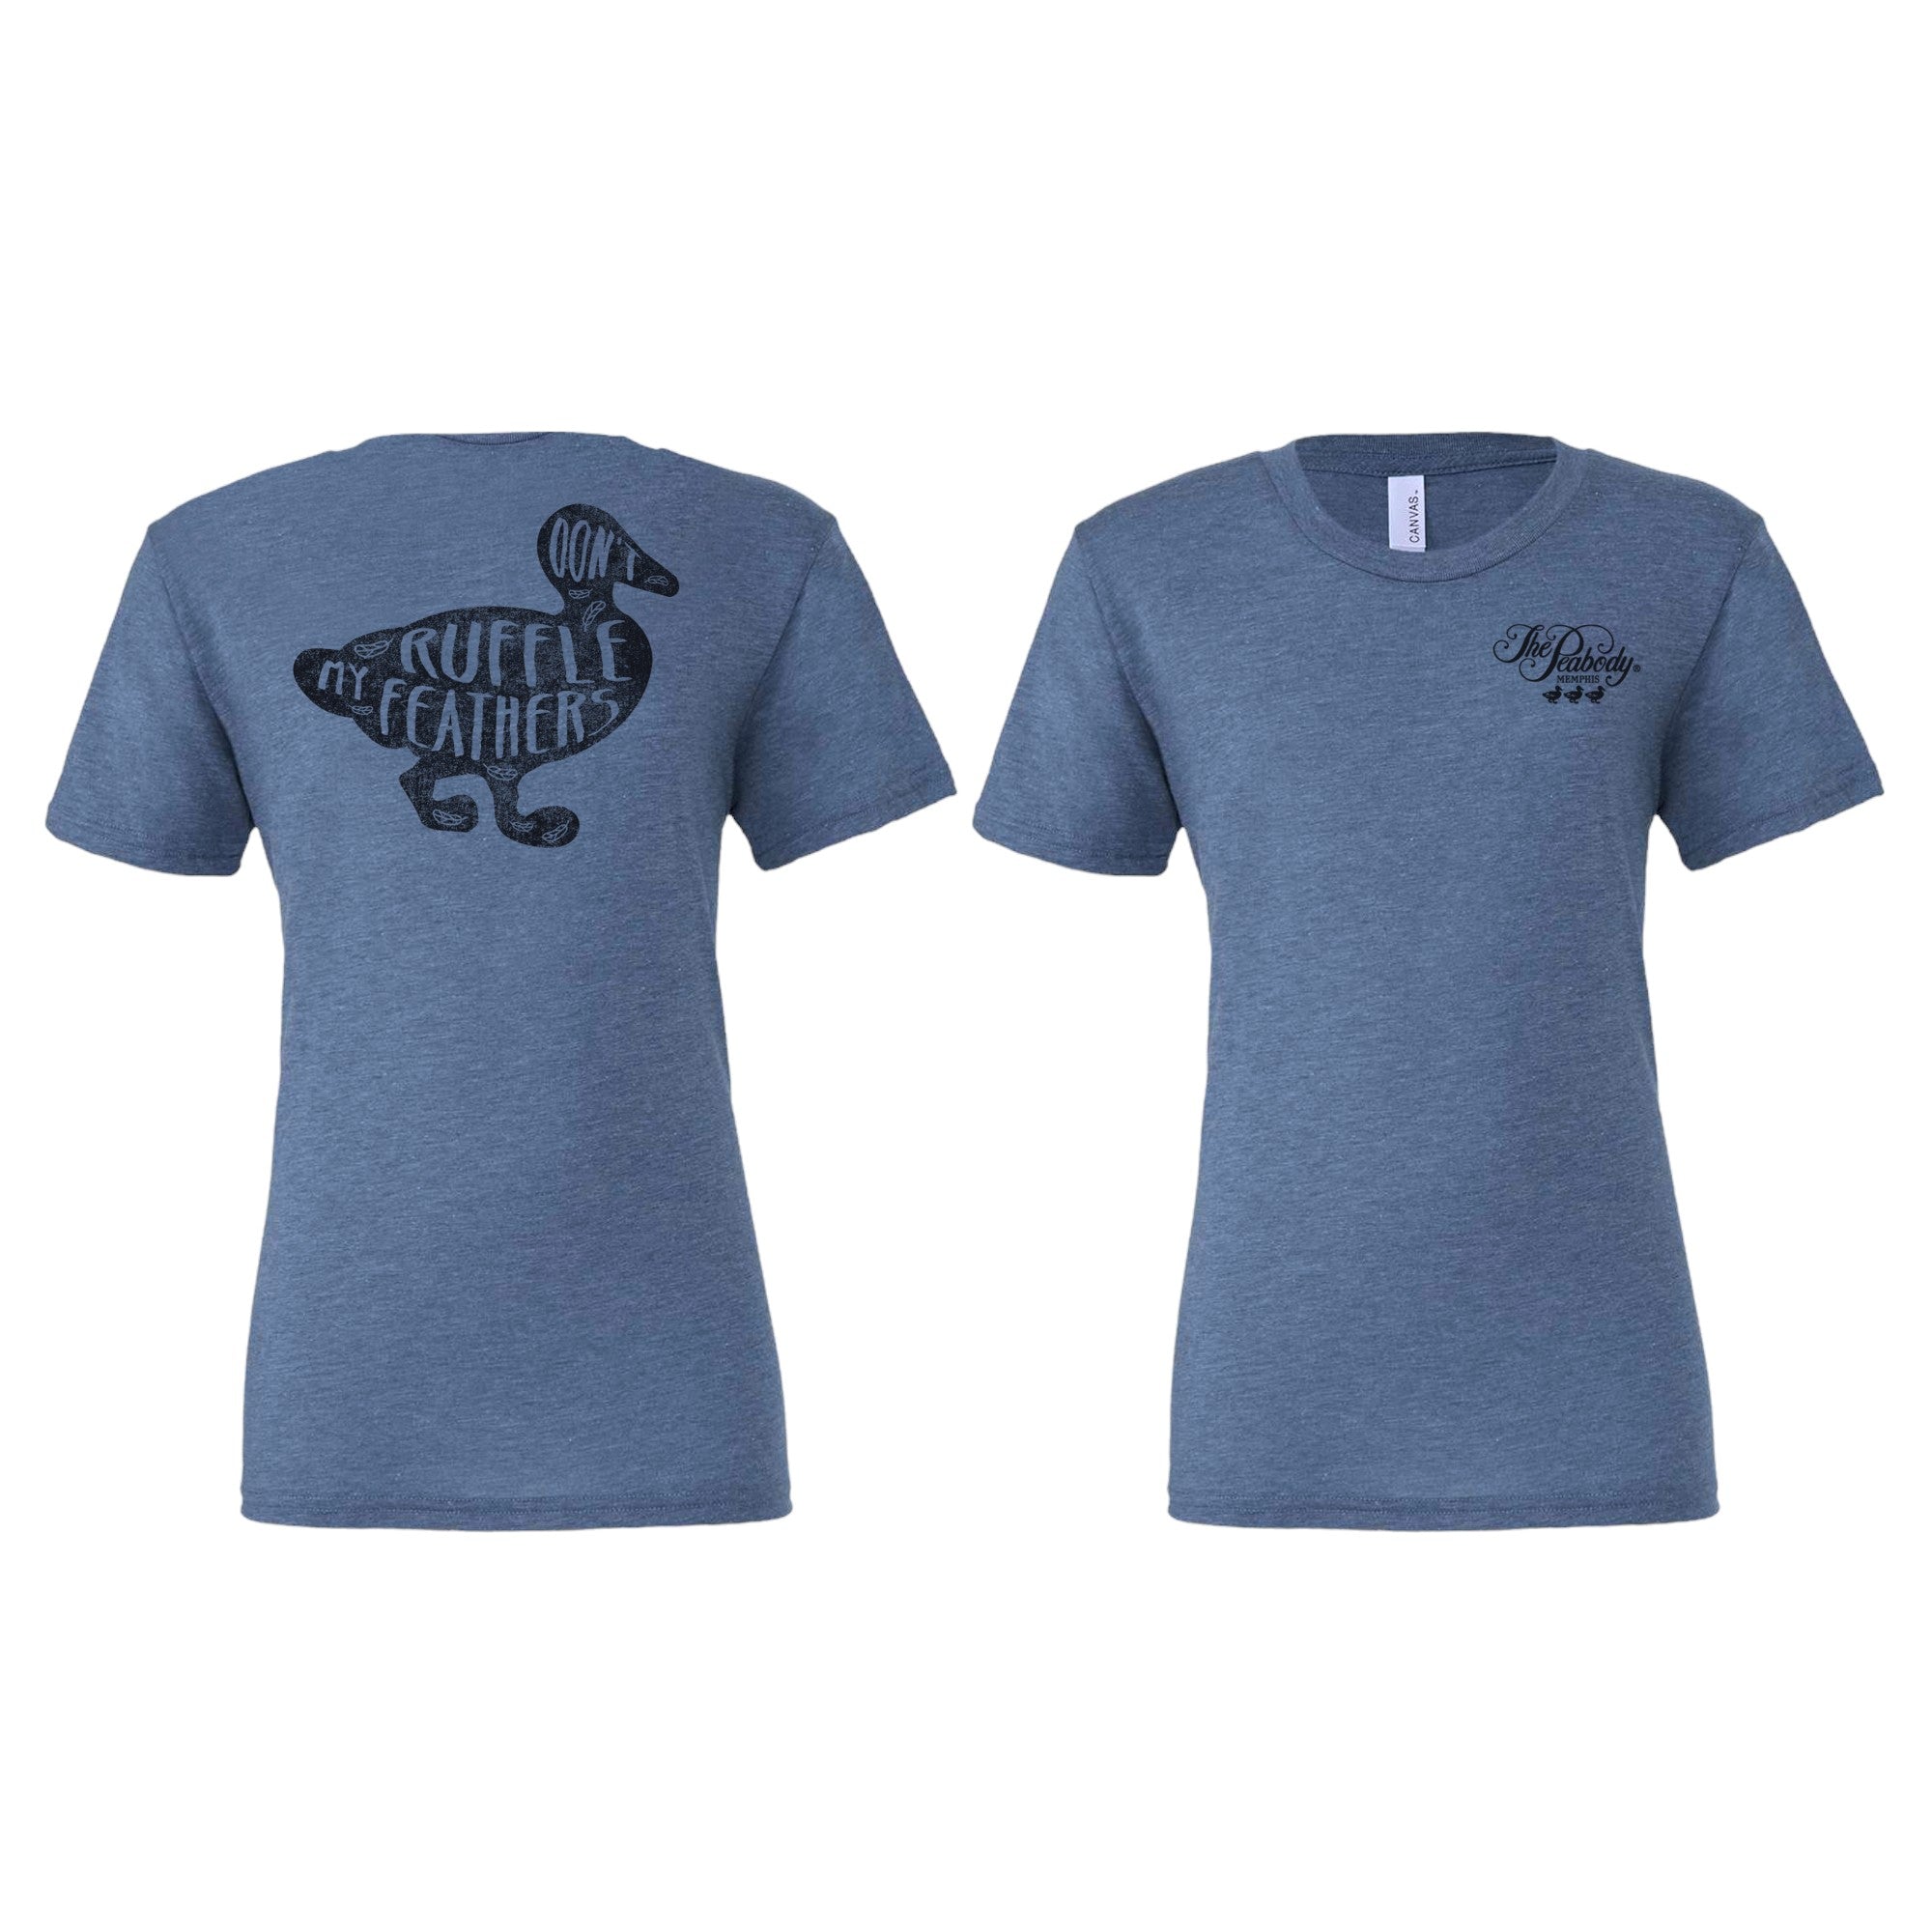 Don't Ruffle My Feathers Tee - Blue